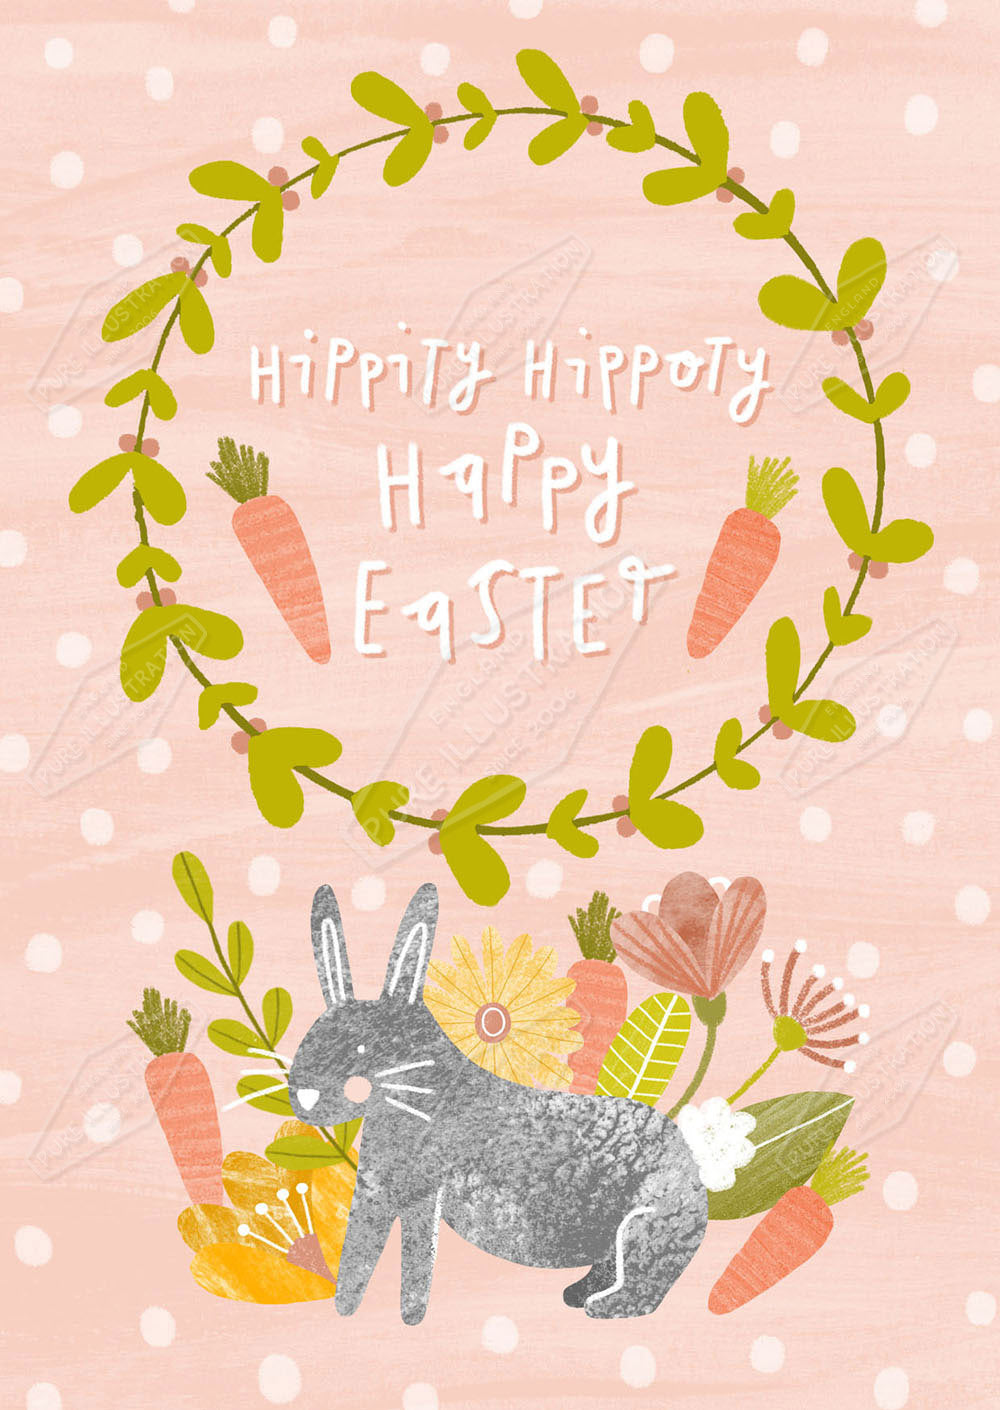 Easter Rabbit Greeting Card Design - by Leah Brideaux - Pure Art Licensing Agency & Surface Design Studio